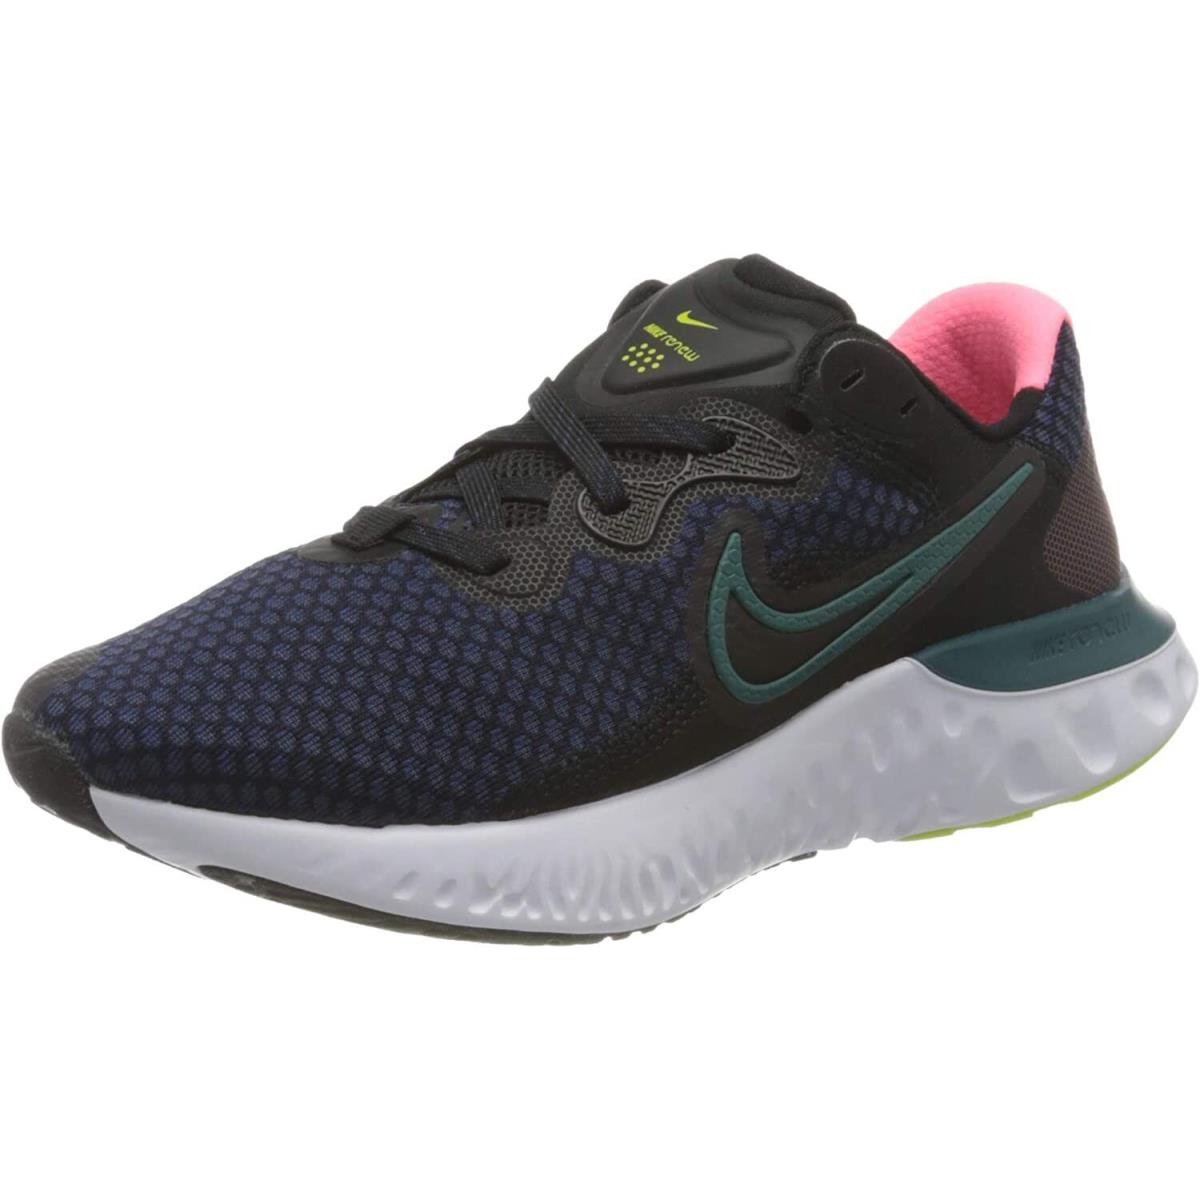 Wmns Nike Women`s Re Run 2 Running Shoes CU3505 004 Size 6.5 US with Box